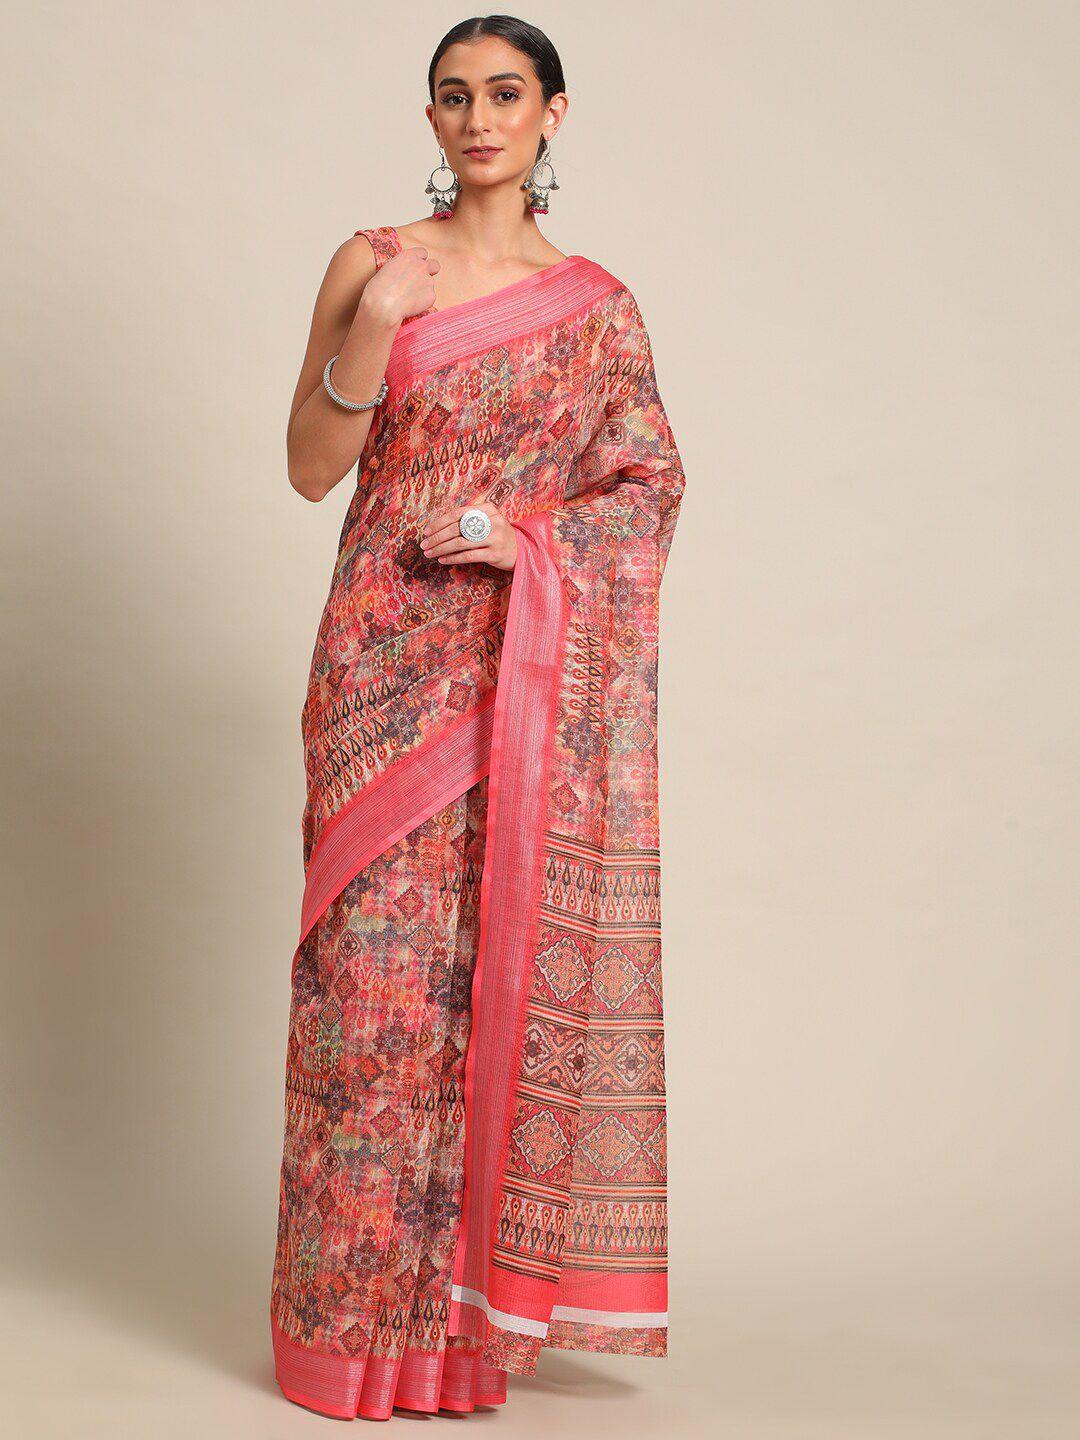 all about you pink & red floral designer saree